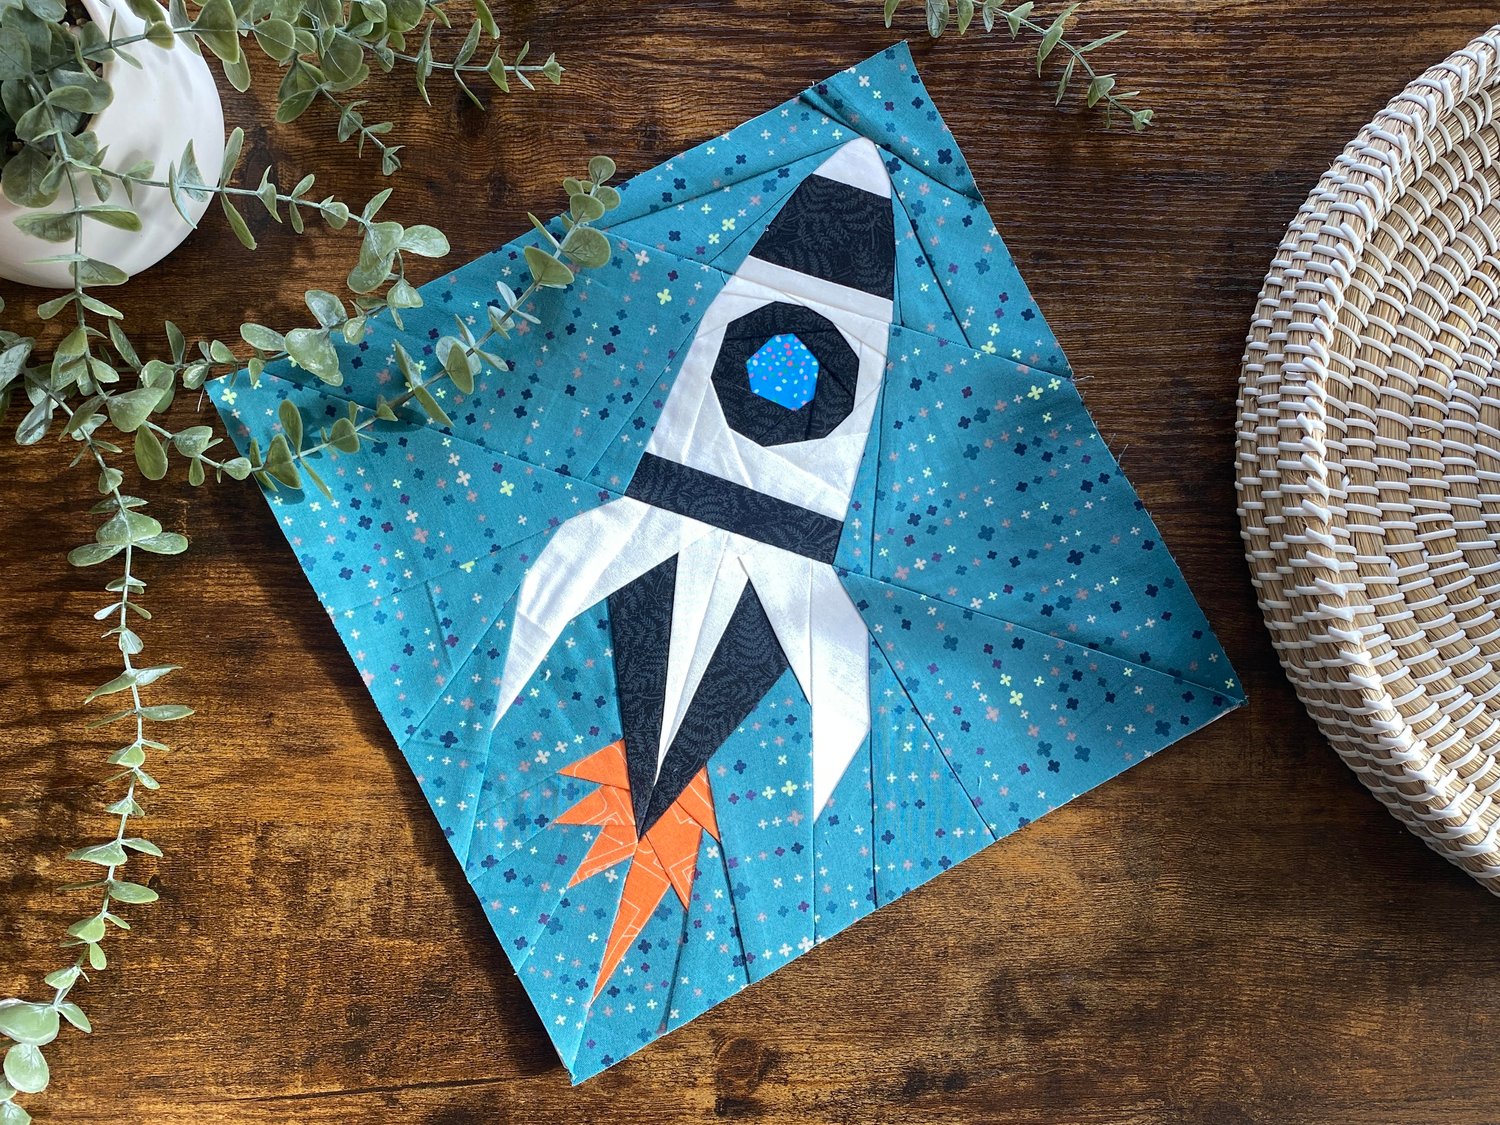 I wasn't going to let that last fabric scrap go to waste, so I added it to my Rocket Ship Quilt block!